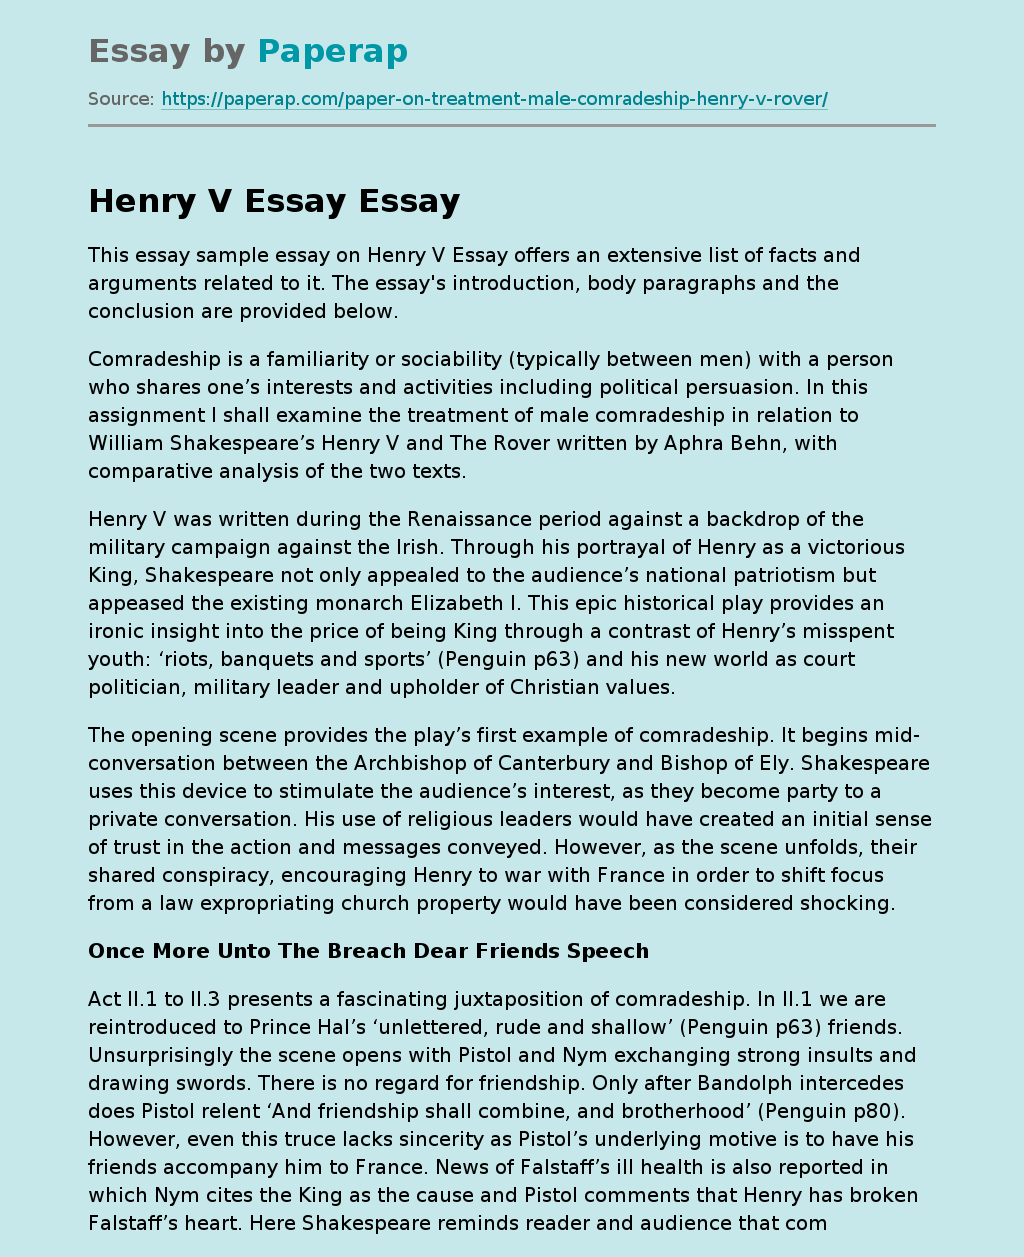 Henry V: Facts and Arguments